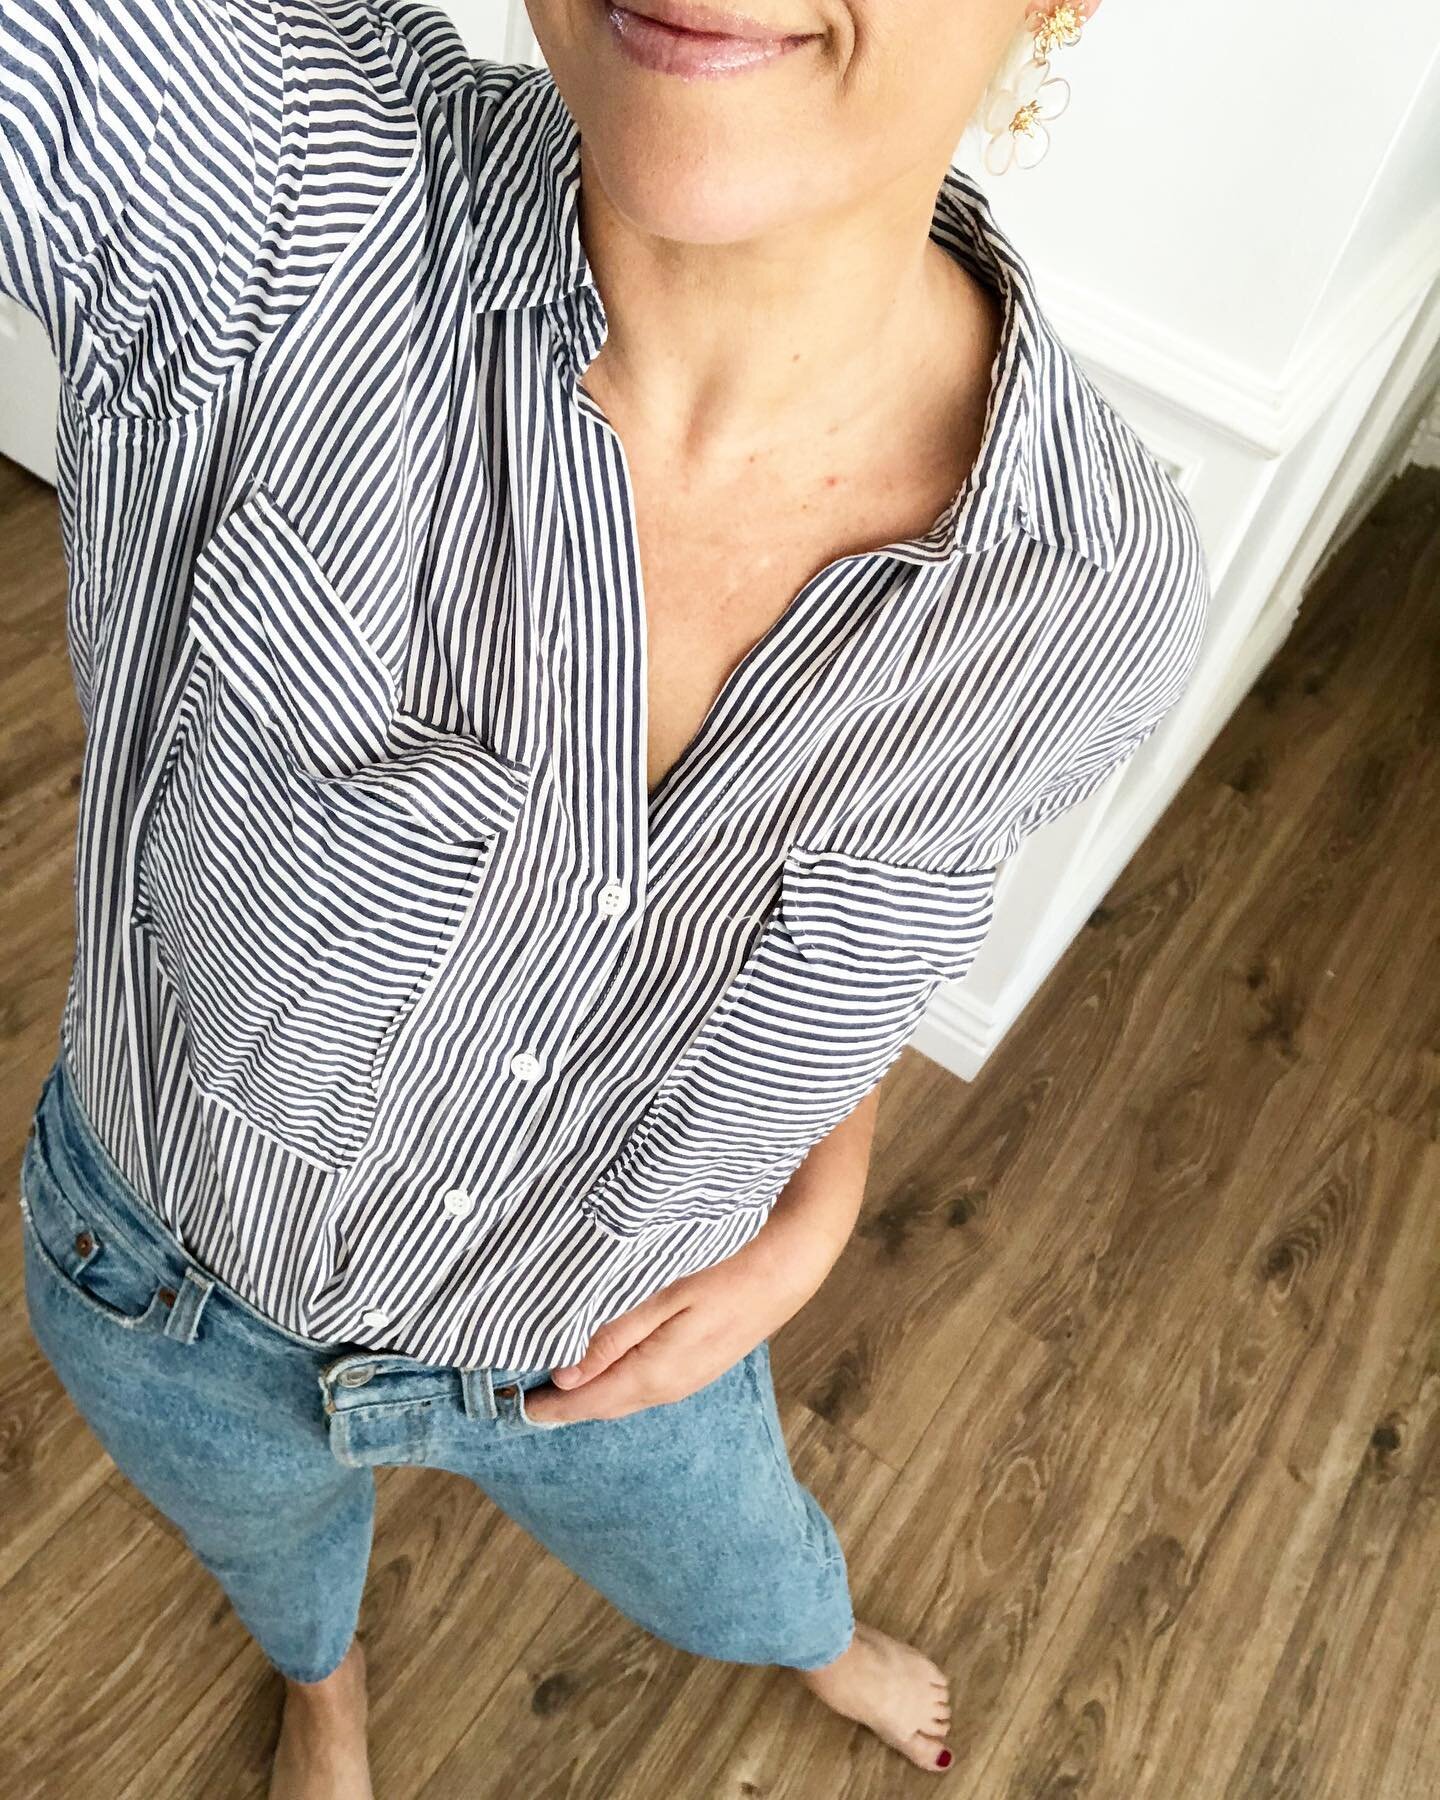 I&rsquo;ve been working on elevating my daily casual wear around here. No more mismatched sweats! We did a year of that and now it&rsquo;s time to put on a legit outfit to handle the day! Who&rsquo;s with me! 💪🏻 http://liketk.it/39HqK #liketkit @li